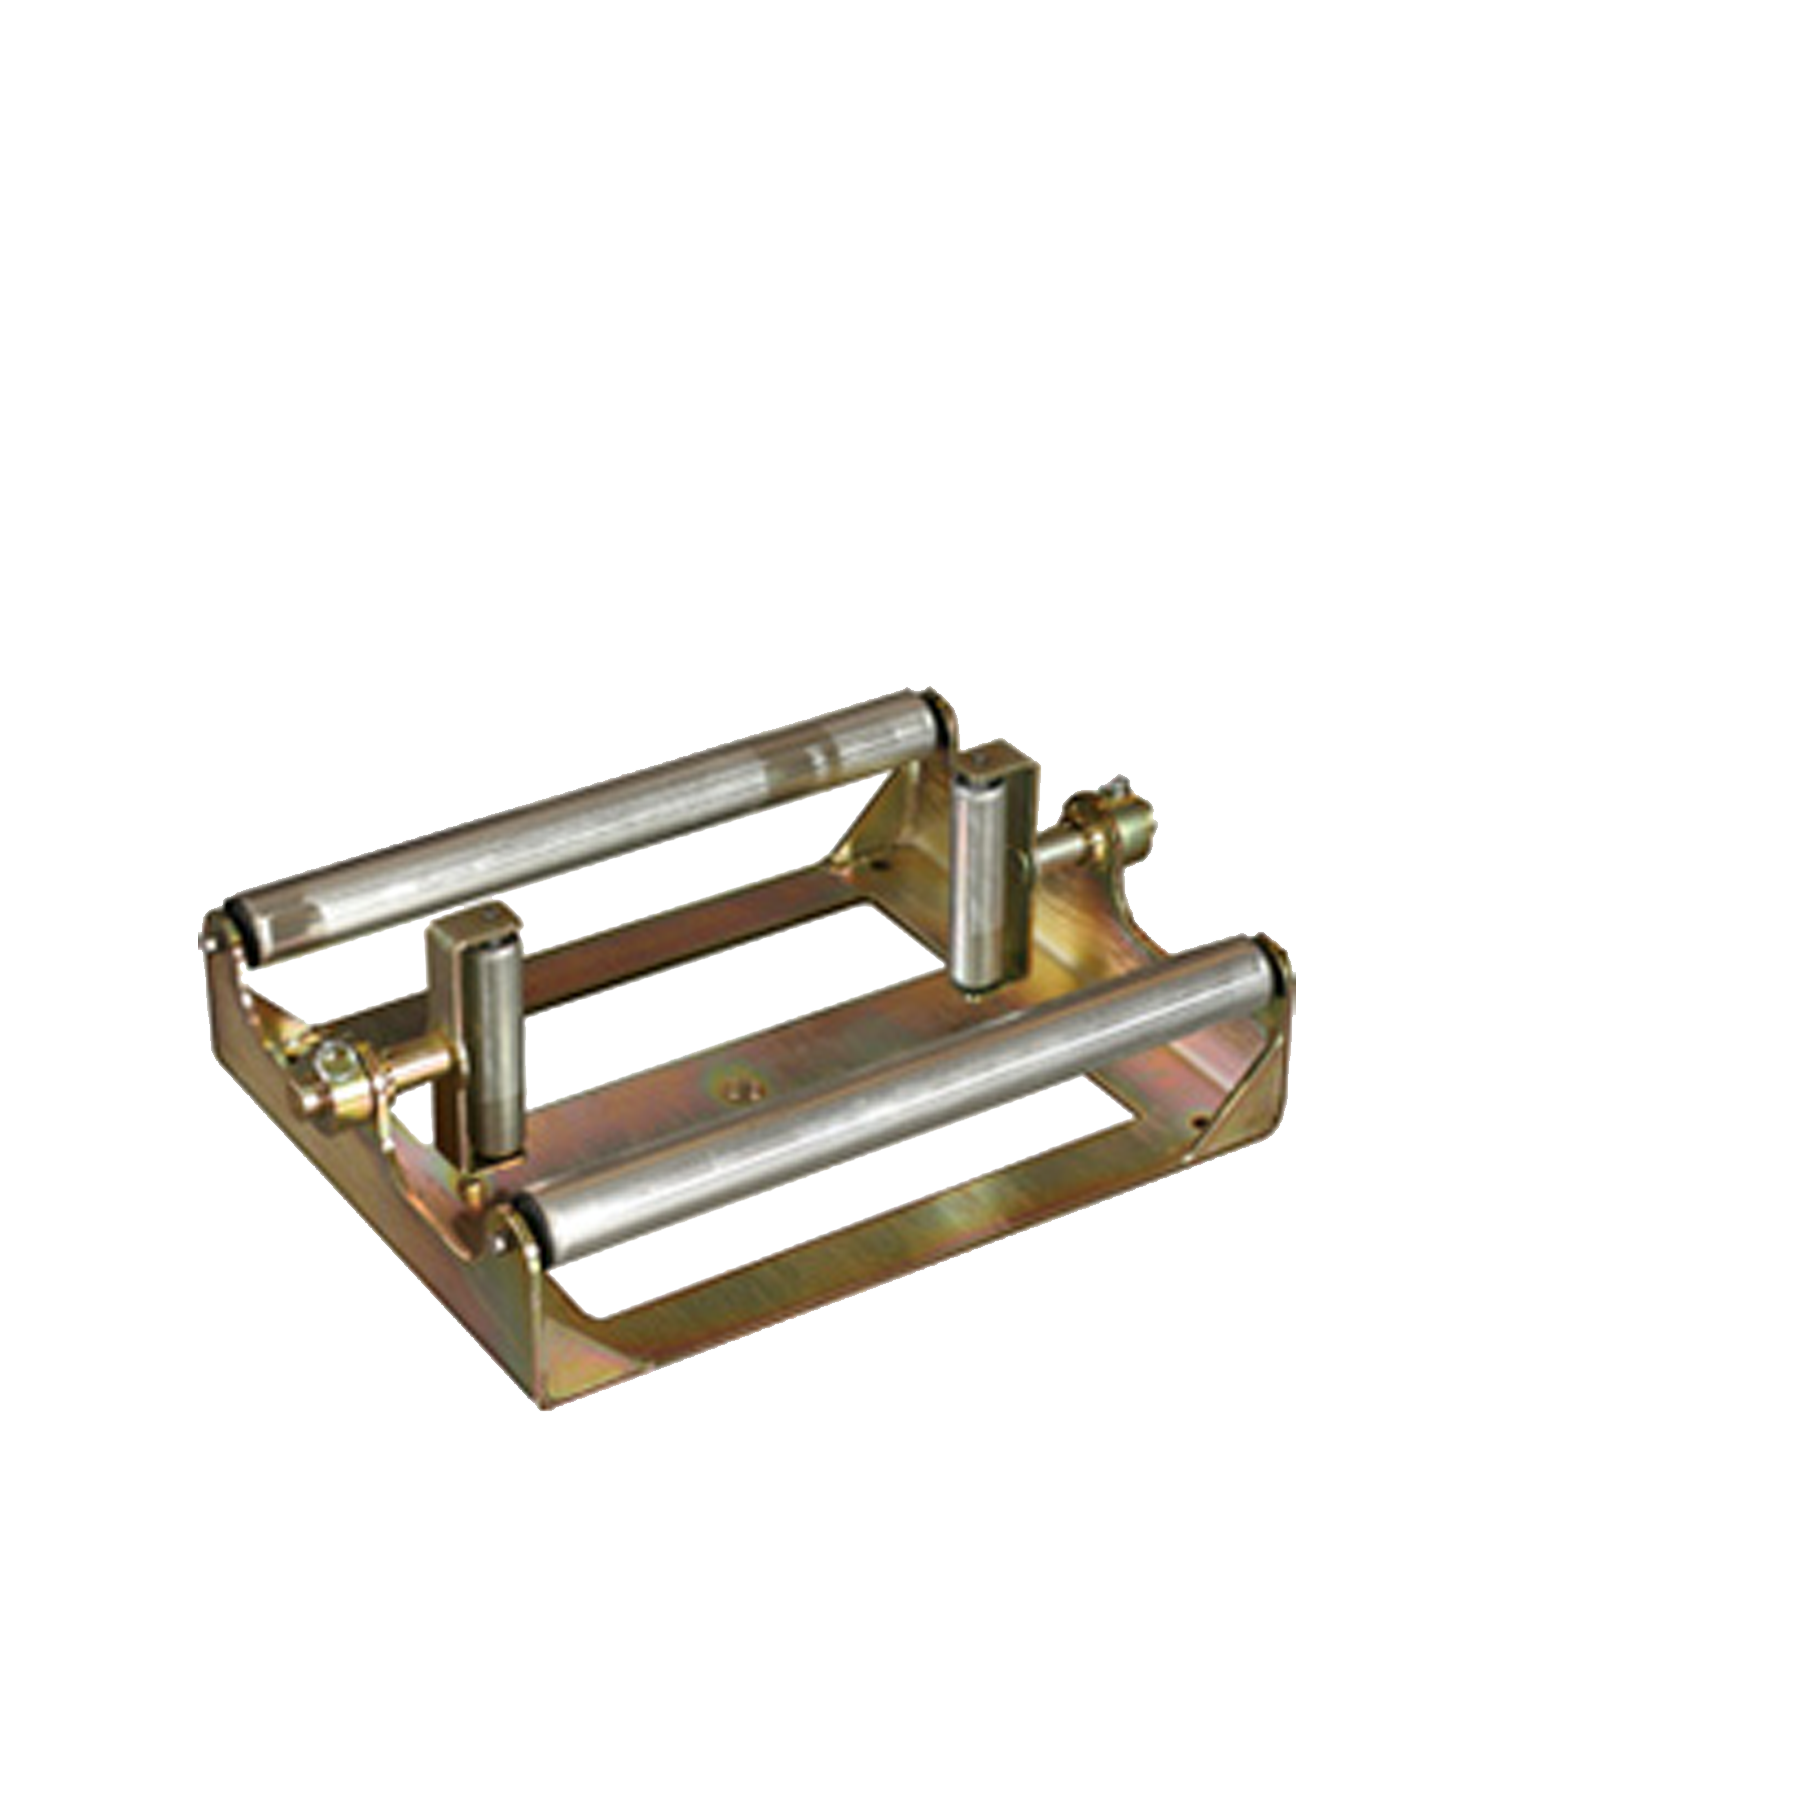 ES78 GUTTER COIL CADDY for 11 7/8" coil works with your seamless gutter machine 